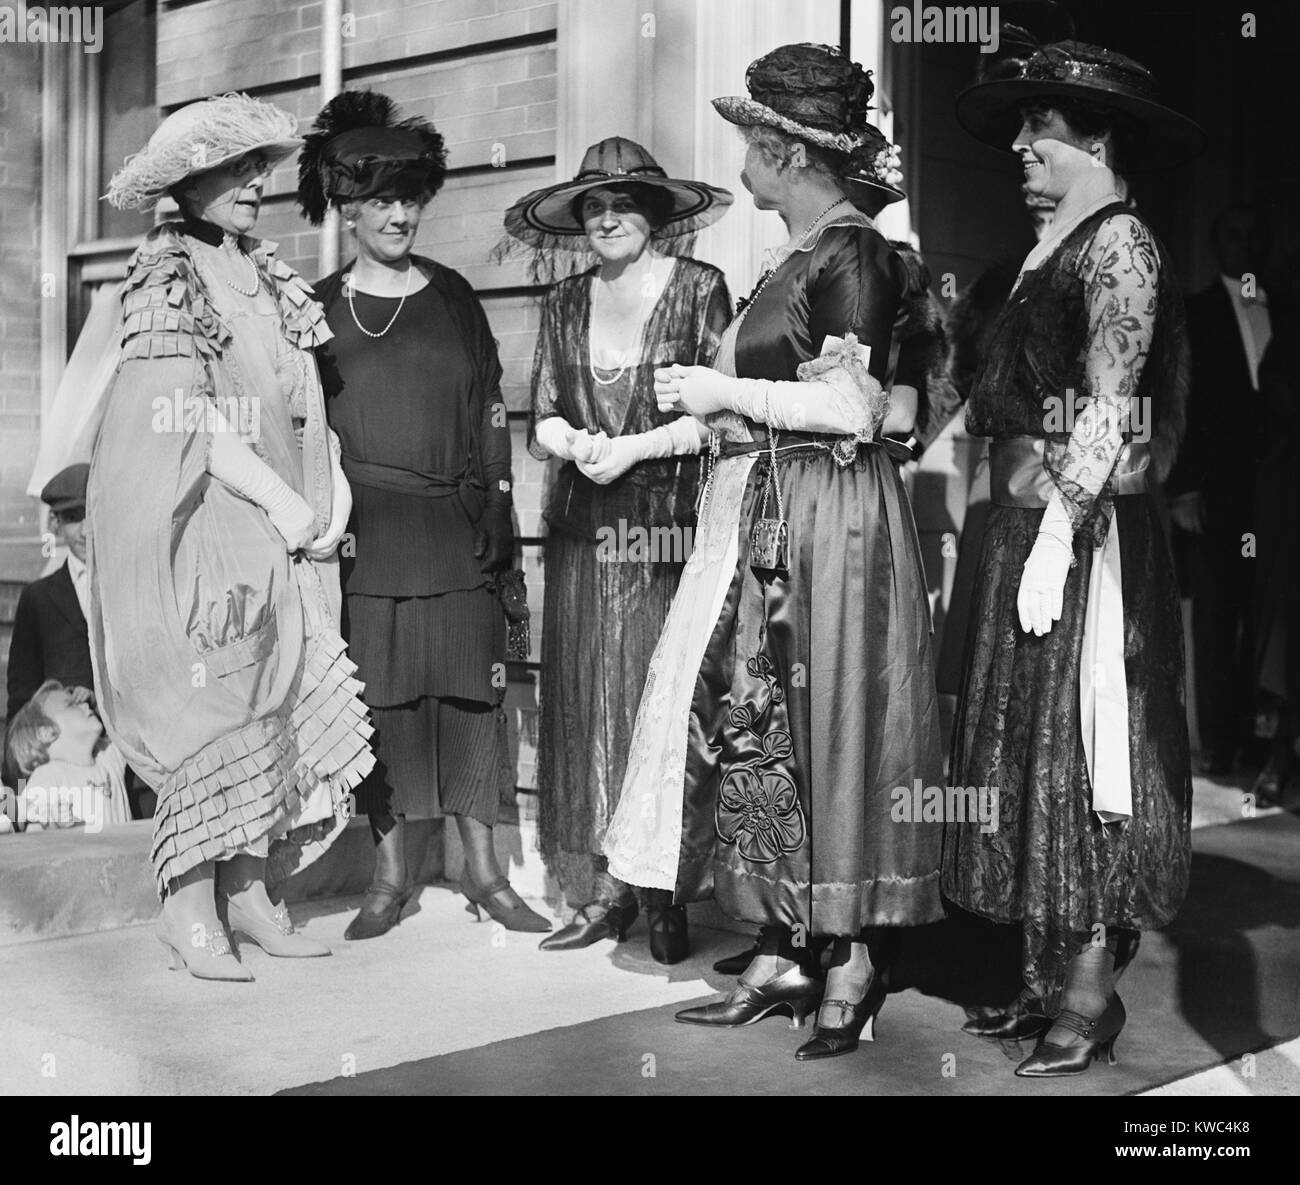 First Lady Florence Harding (left) with a group including Grace Coolidge (right). Ca. 1921-23. The women wear elaborate early 1920s loose fitting dresses and large hats. (BSLOC 2015 15 69) Stock Photo